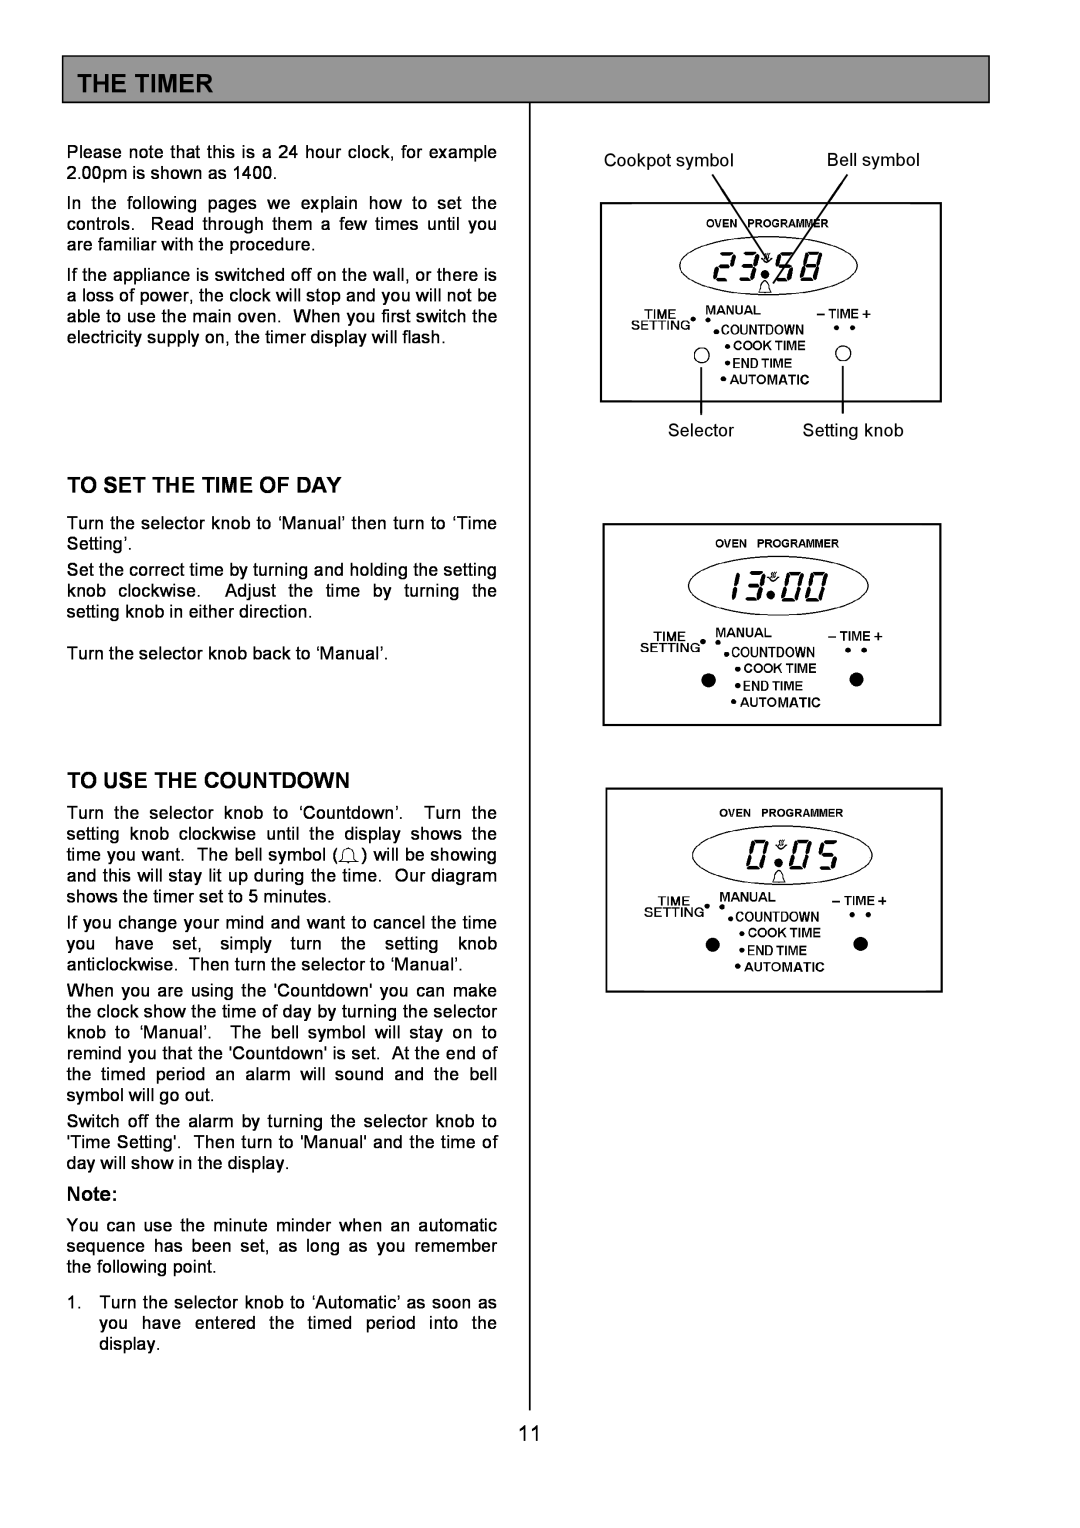 Tricity Bendix DSIE456 installation instructions The Timer, To Set The Time Of Day, To Use The Countdown 